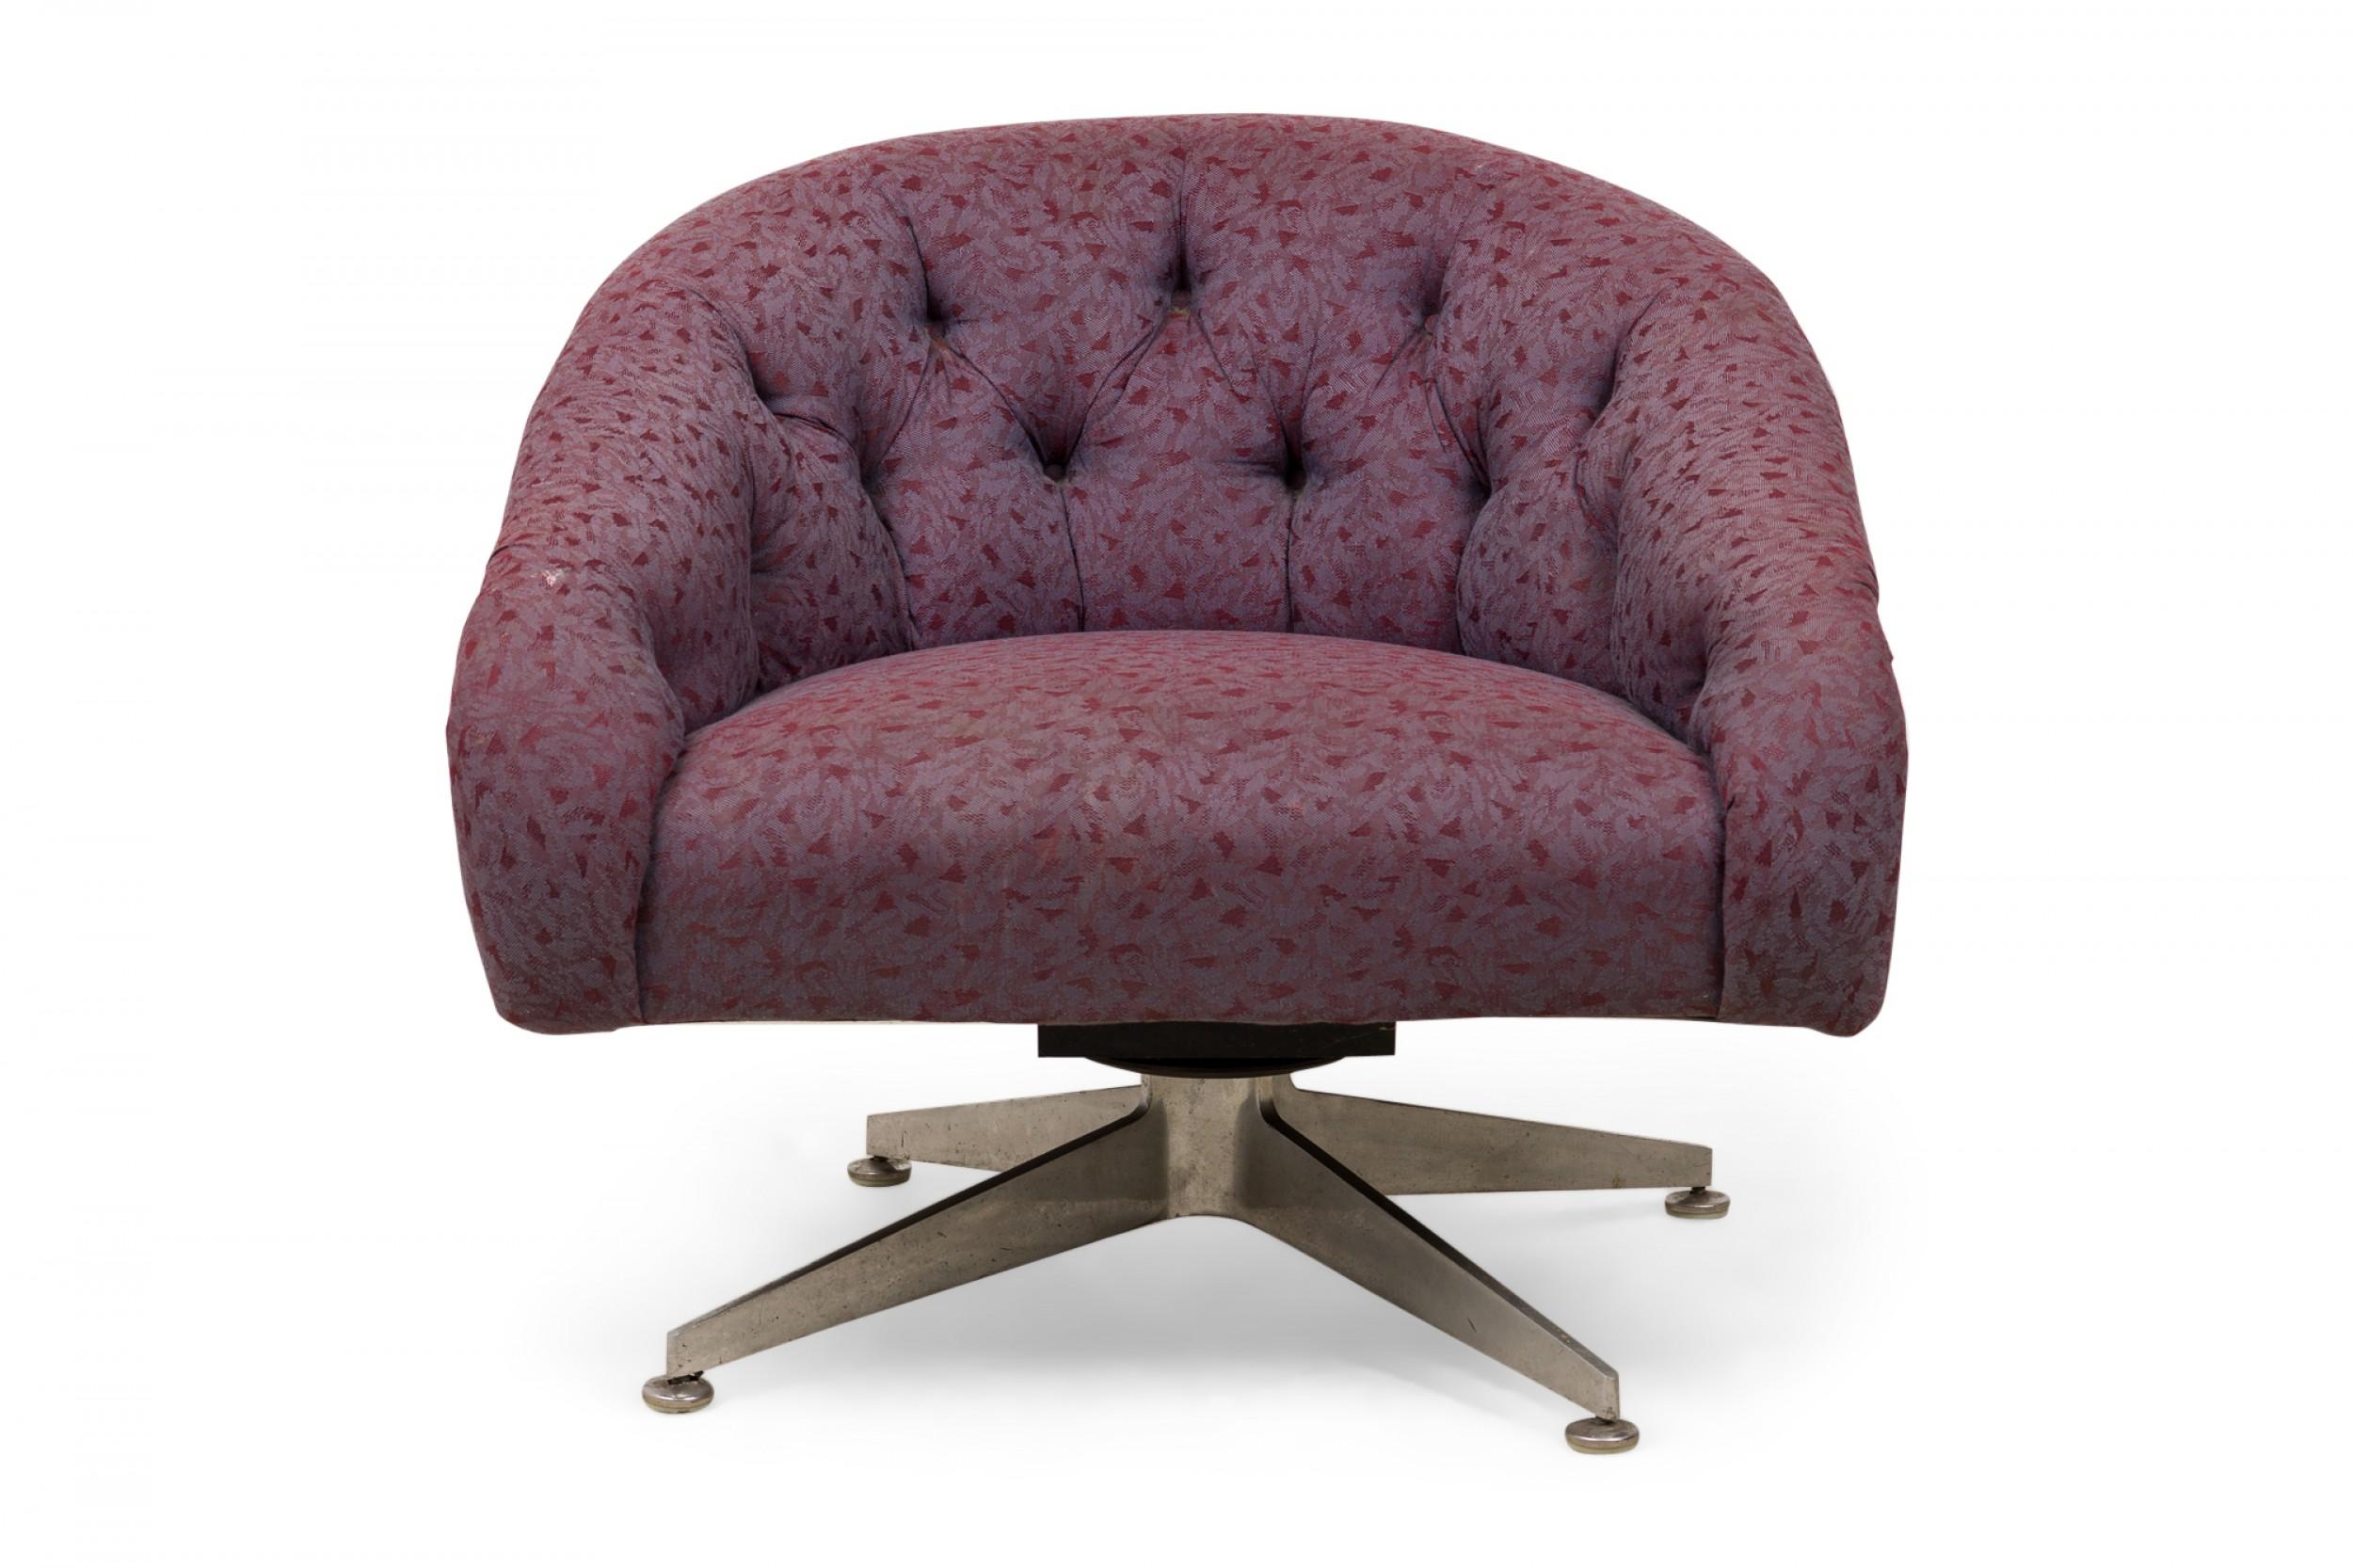 American Mid-Century tub-form swiveling lounge / armchair with lightly patterned purple button tufted fabric upholstery, resting on a four leg brushed chrome pedestal base. (WARD BENNETT)
